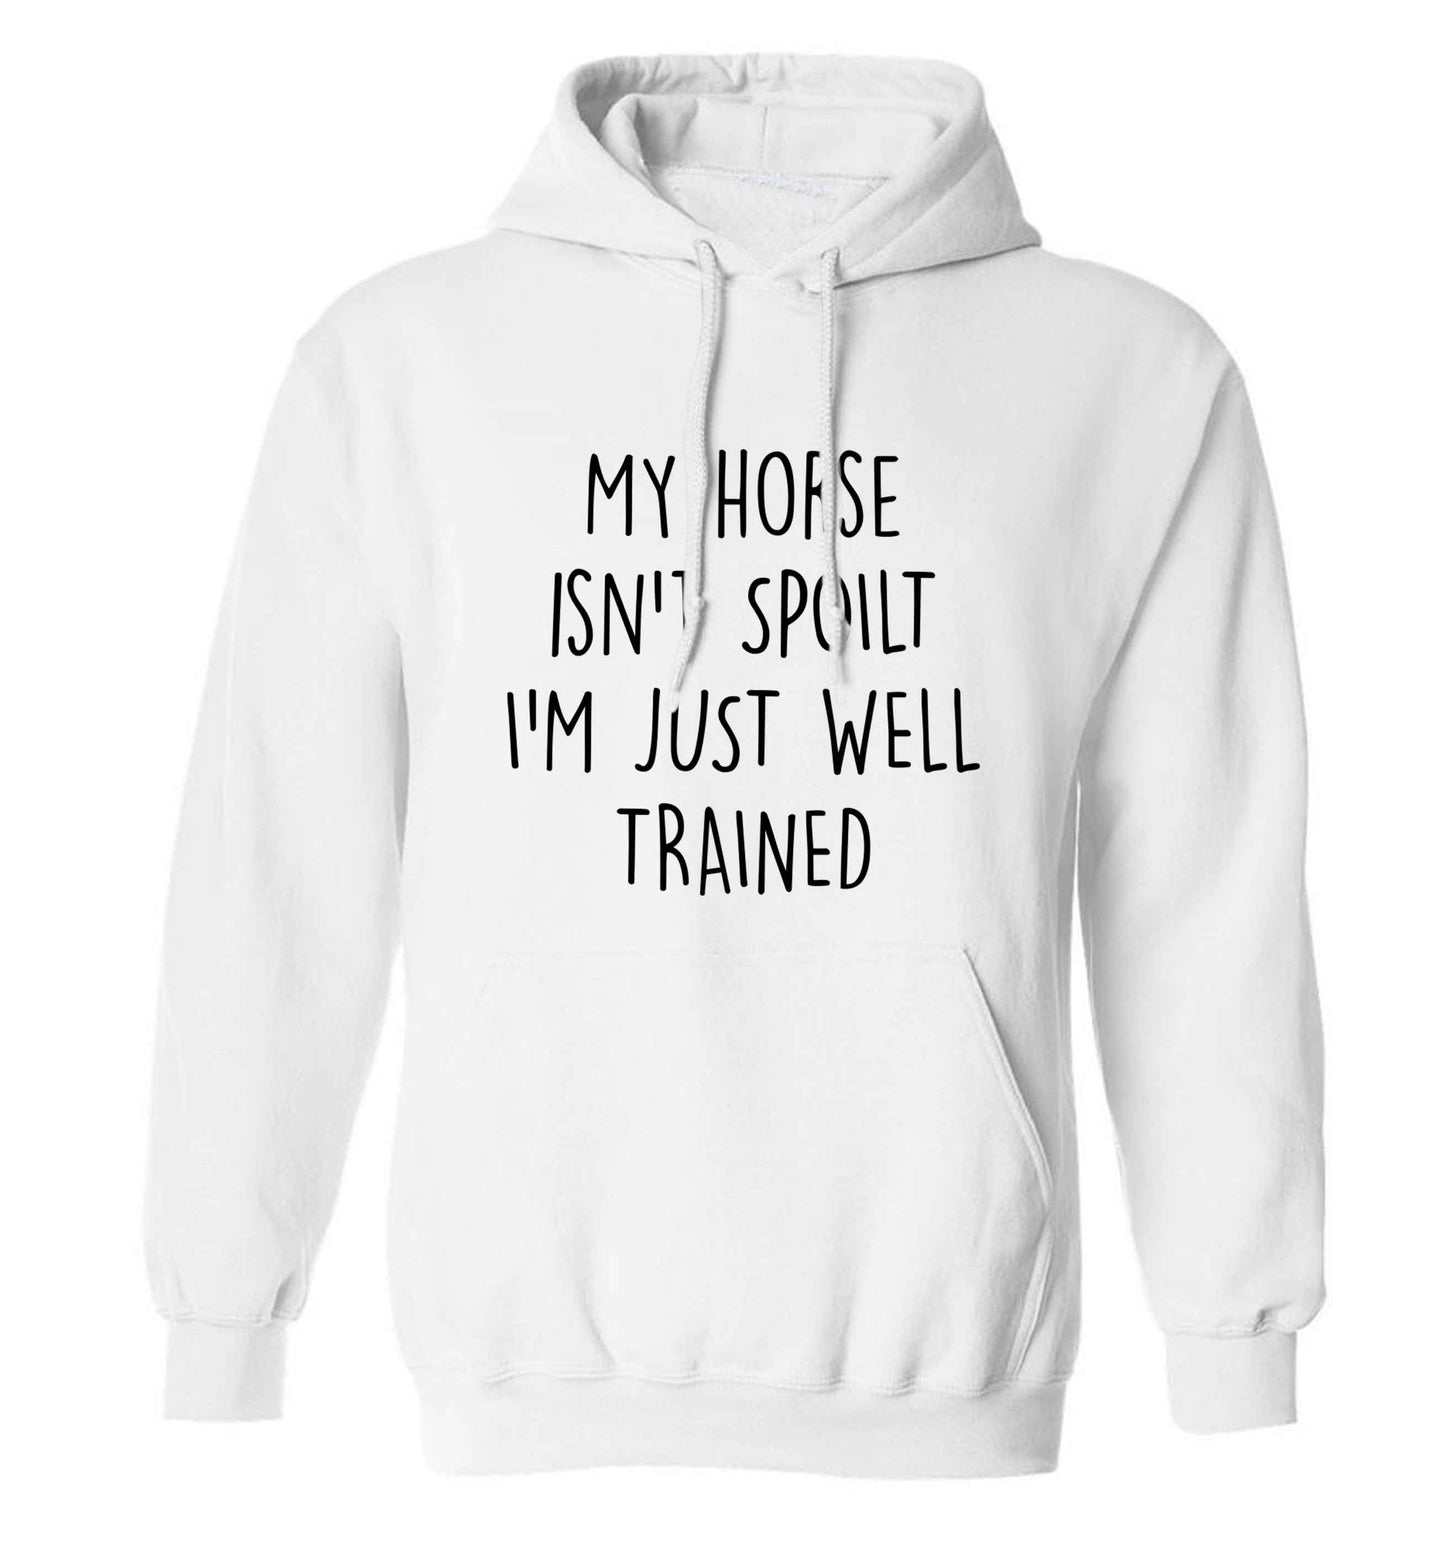 My horse isn't spoilt I'm just well trained adults unisex white hoodie 2XL